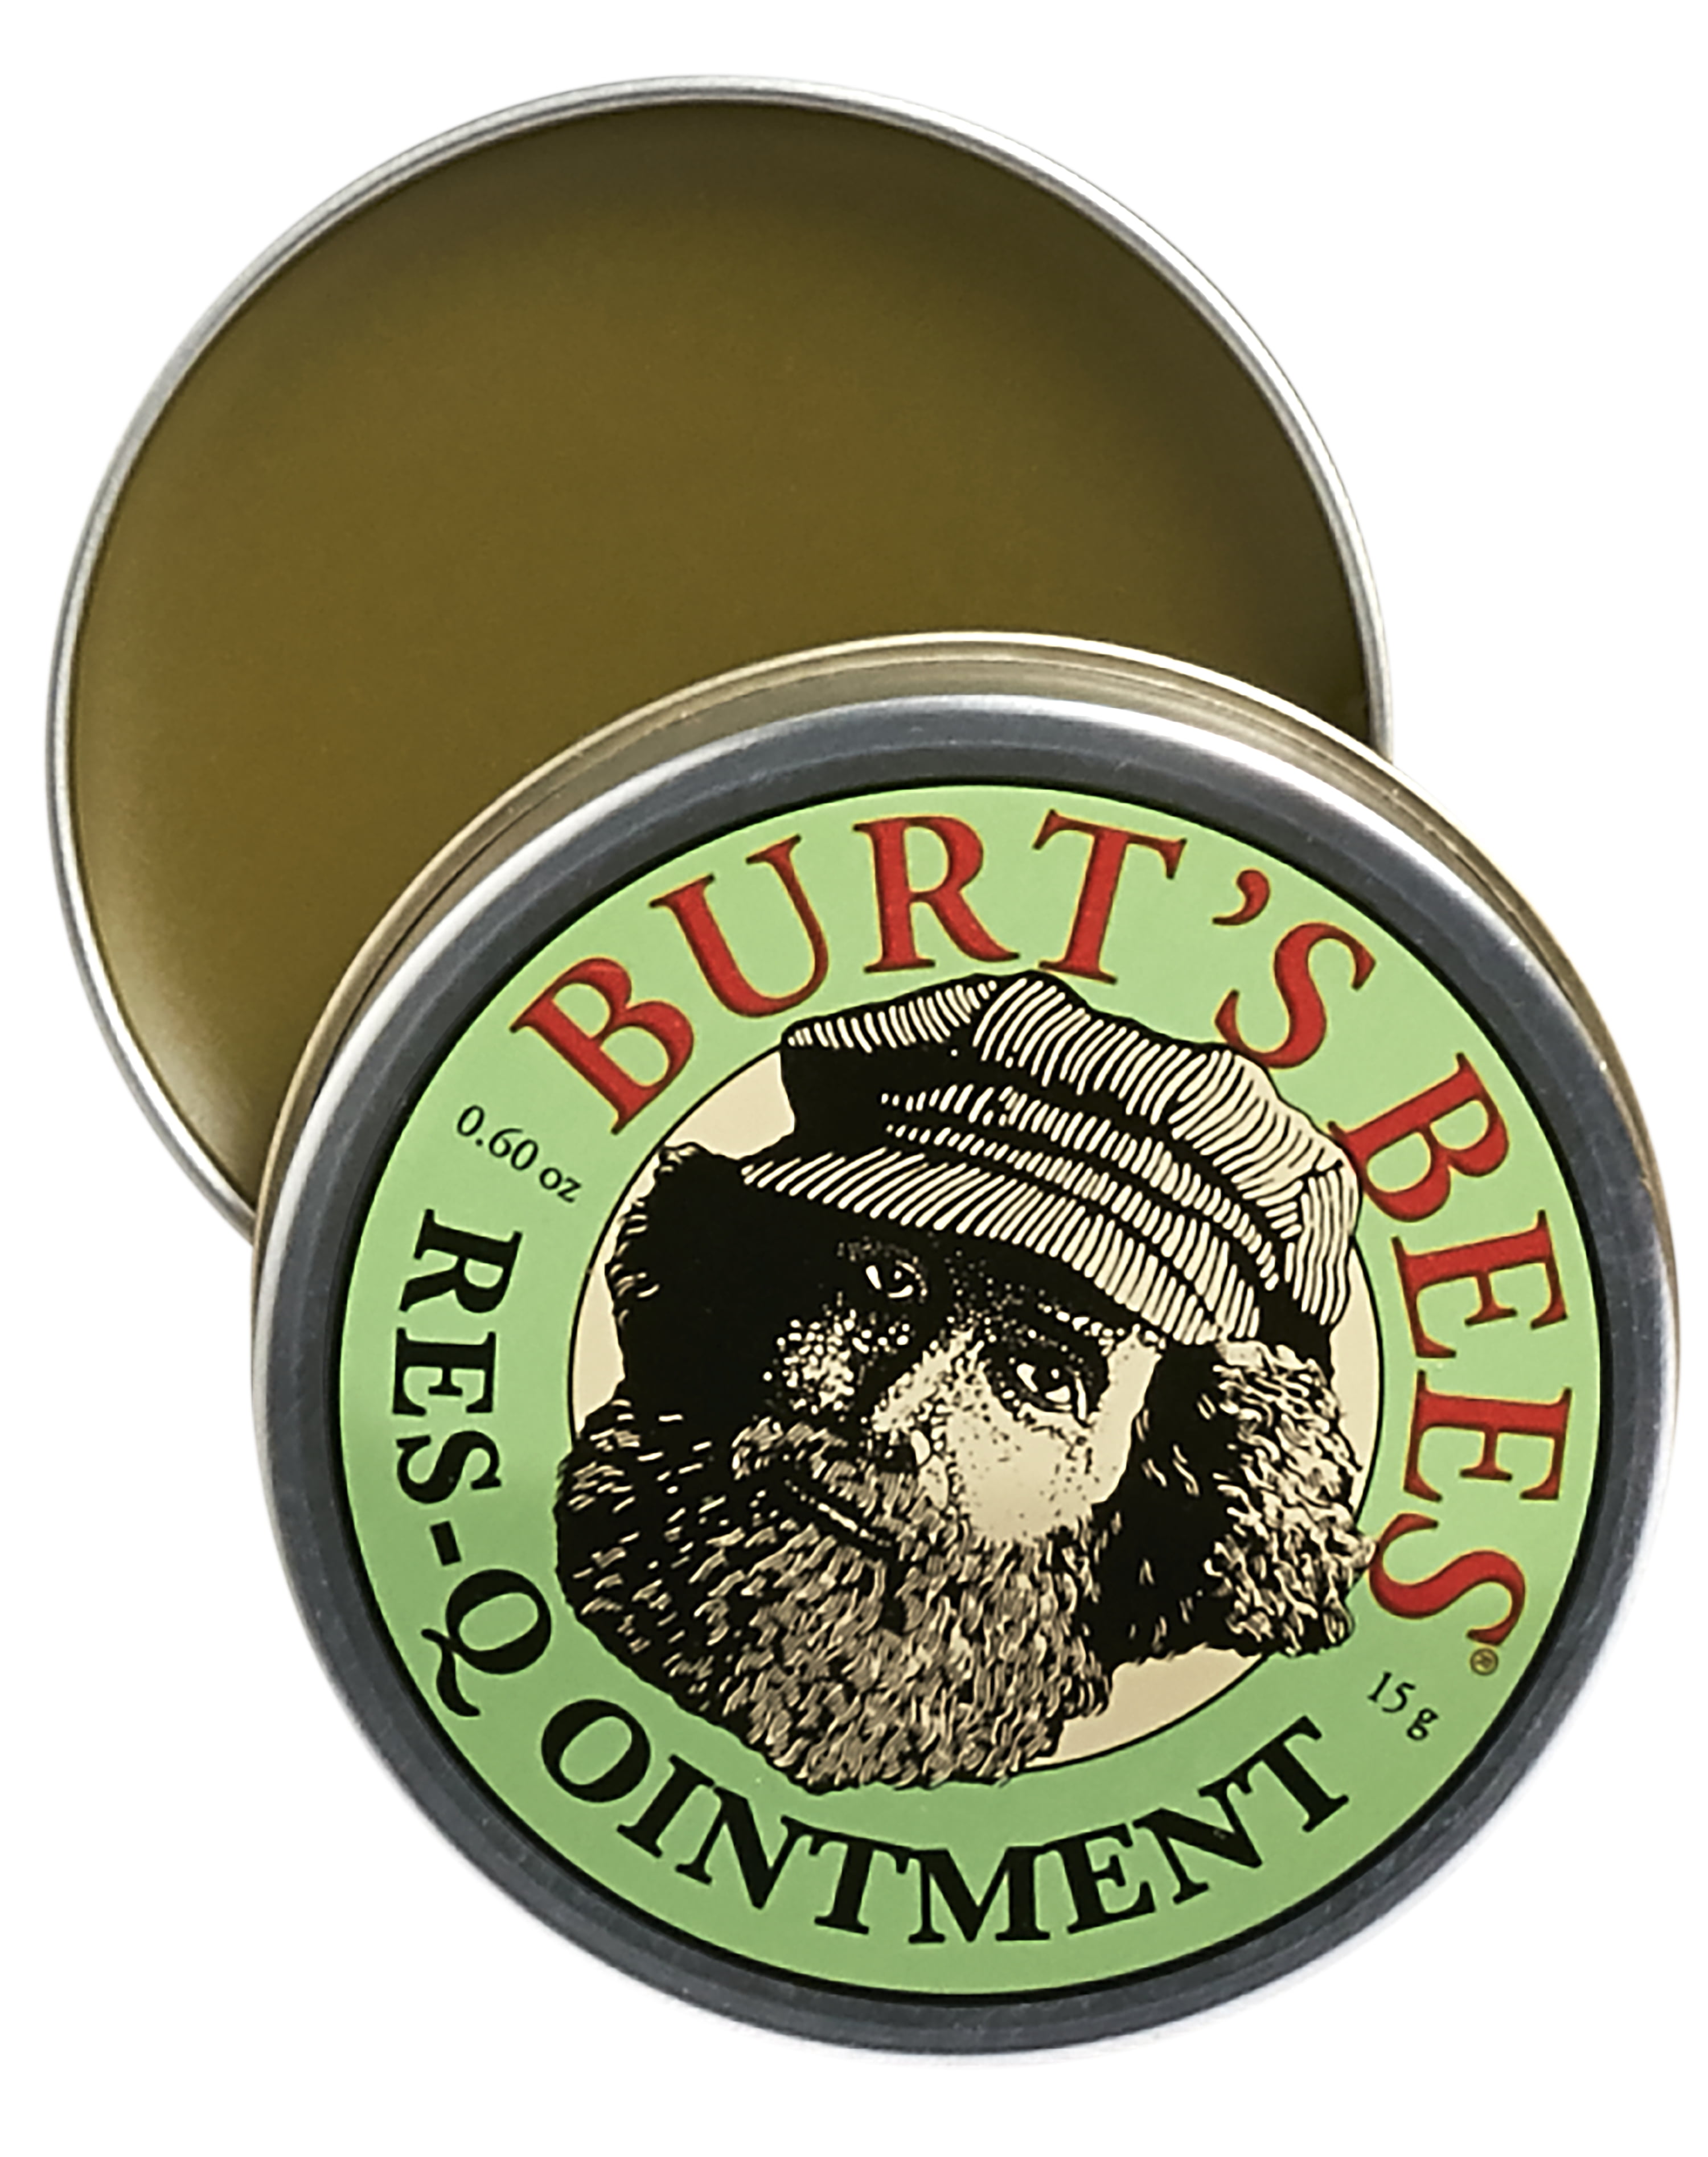 Burt's Bees 100% Natural Res-Q Ointment, Multipurpose Balm  Ounce Tin  